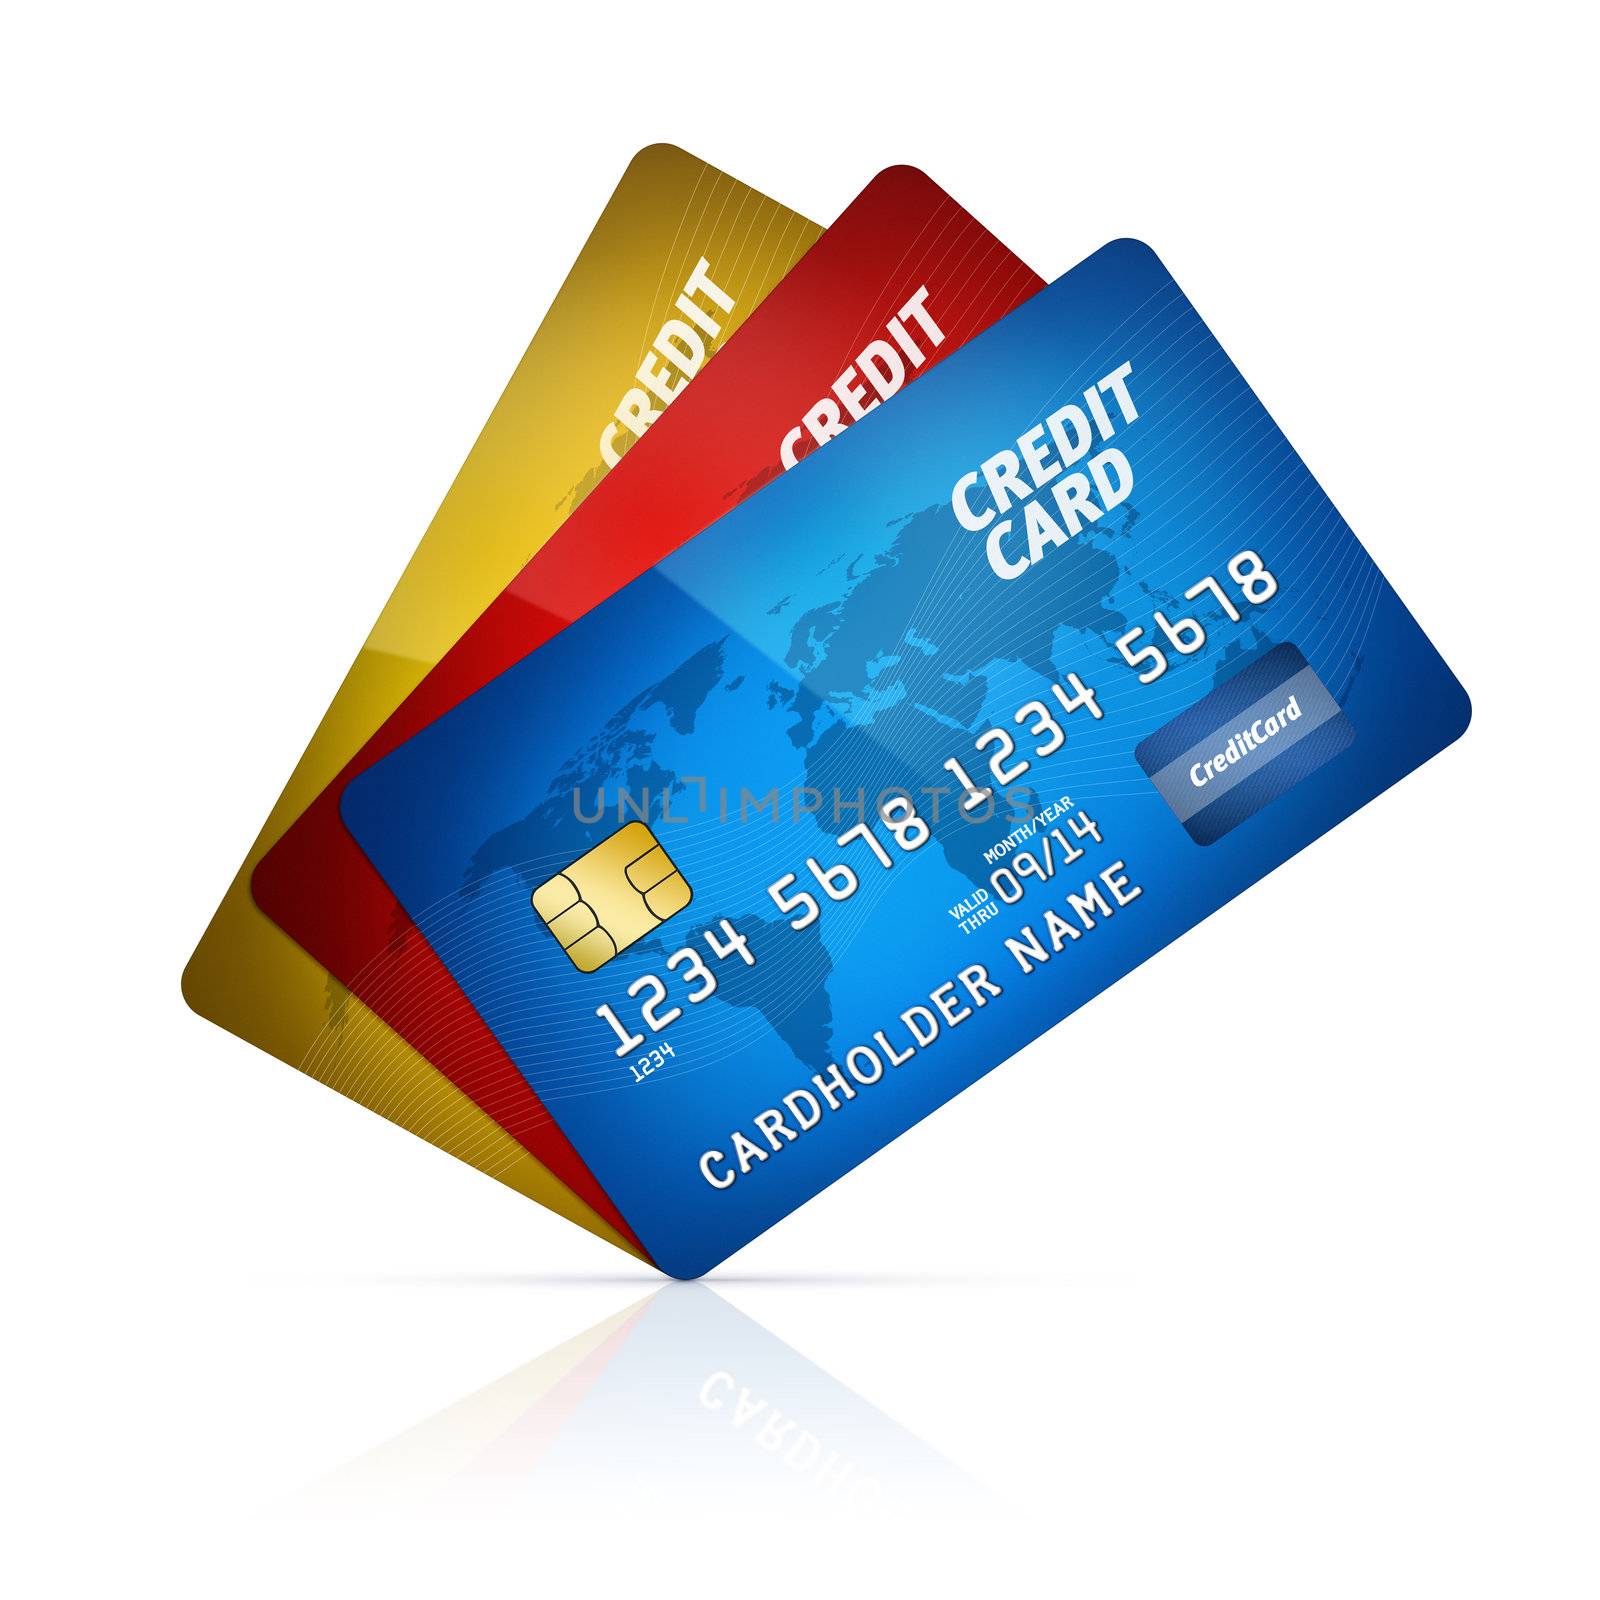 High detail illustration of a plastic credit card. Isolated on white.